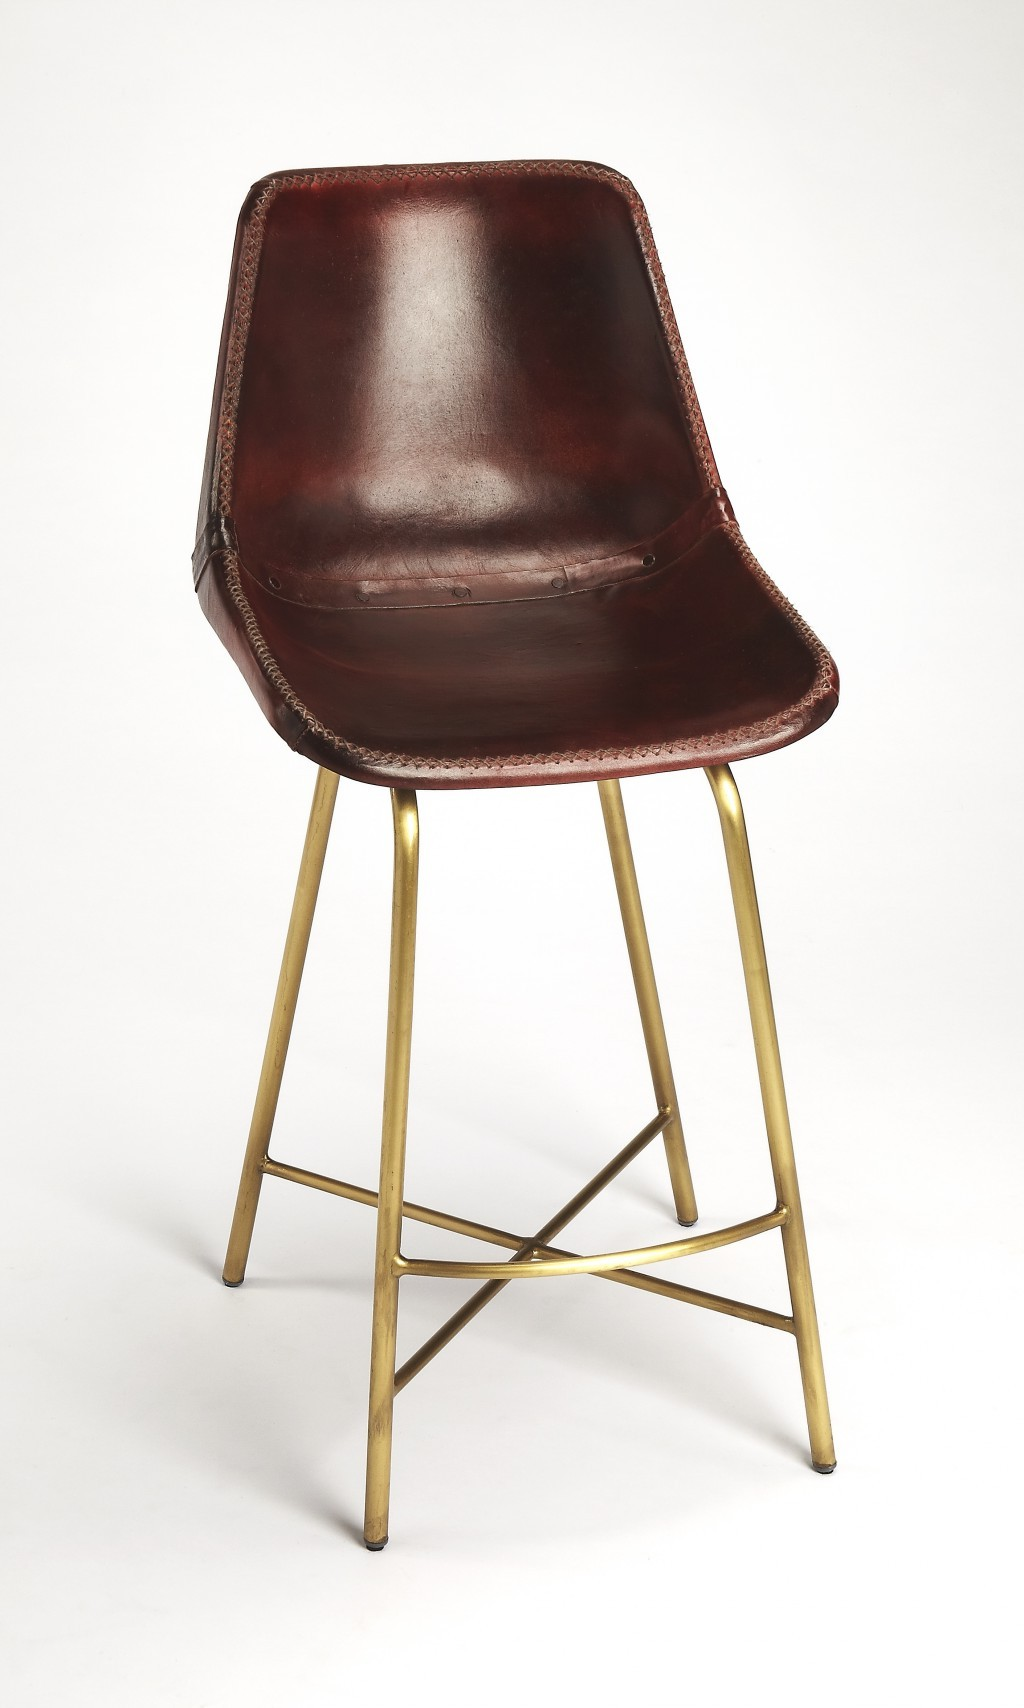 Loft Leather Bar Stool - Brown and Gold